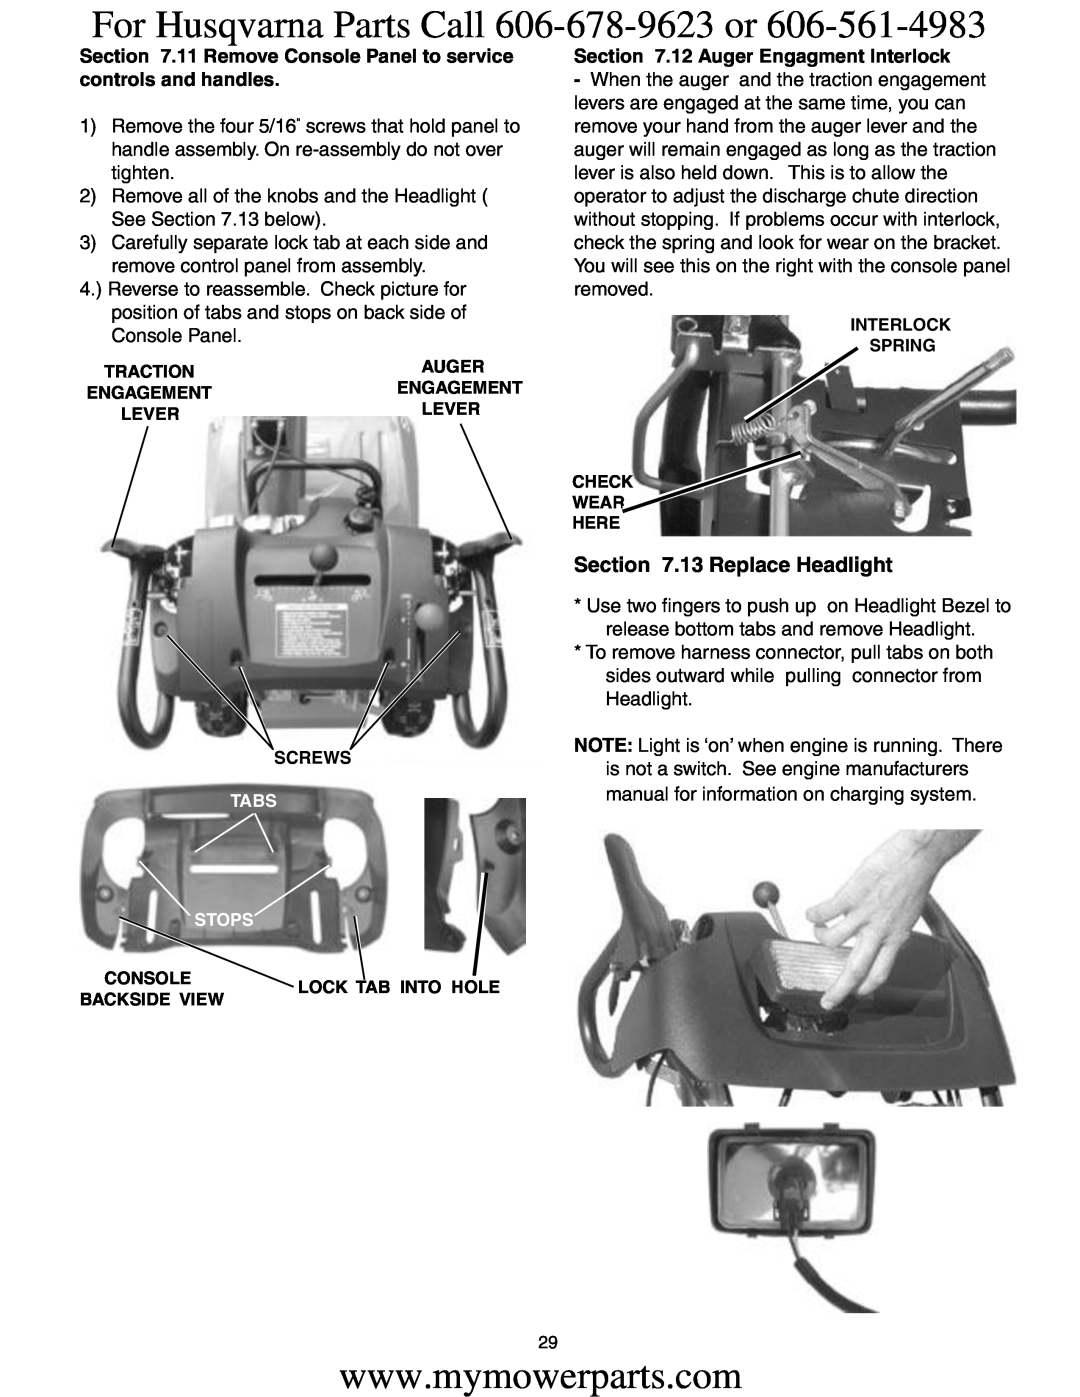 Electrolux OHV service manual For Husqvarna Parts Call 606-678-9623 or, 13 Replace Headlight, 12 Auger Engagment Interlock 